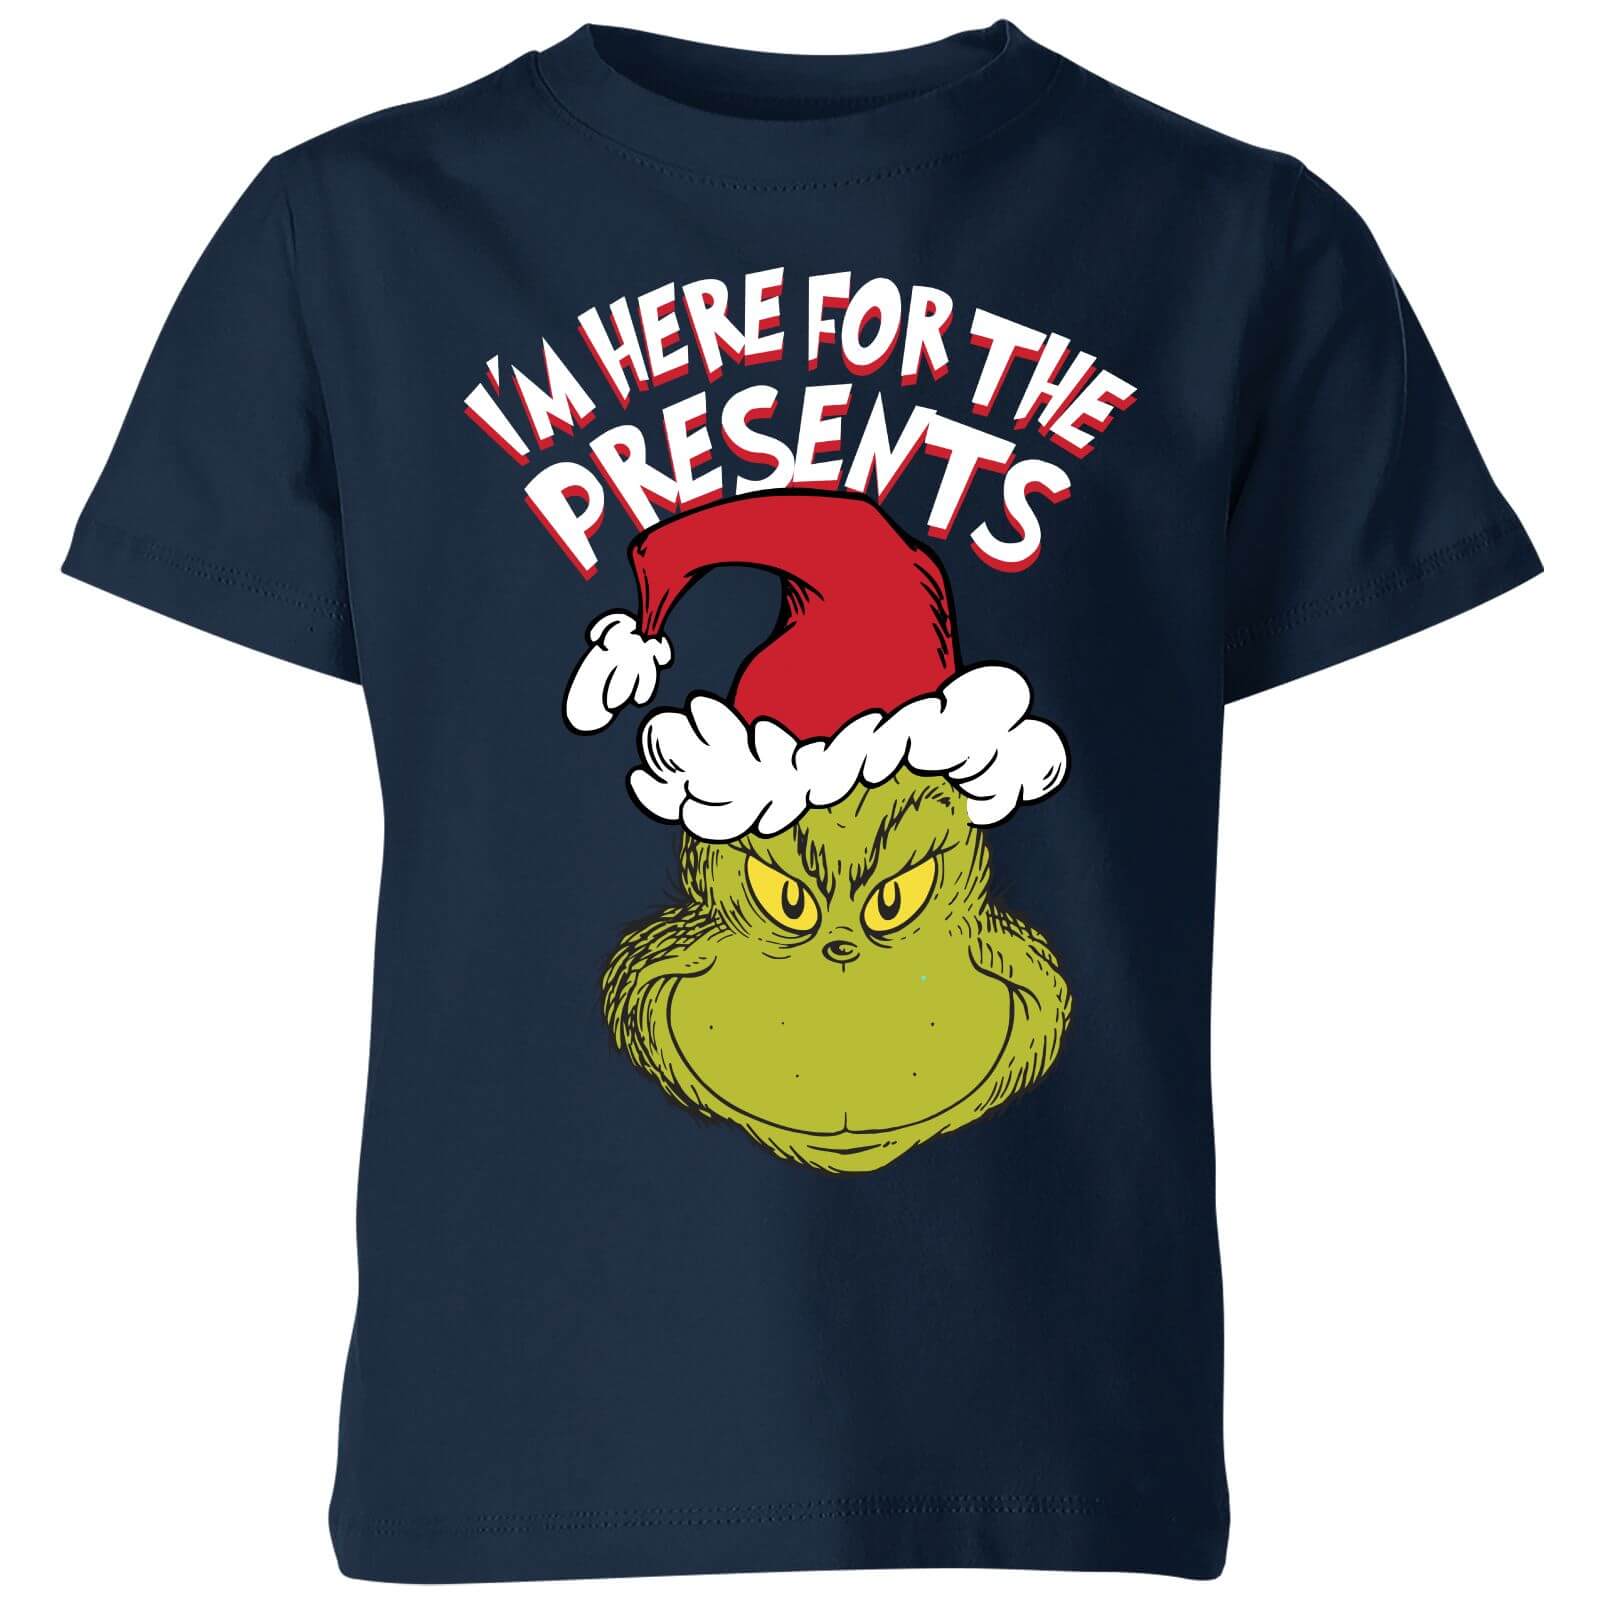 The Grinch Im Here for The Presents Kids Christmas T-Shirt - Navy - 7-8 Years